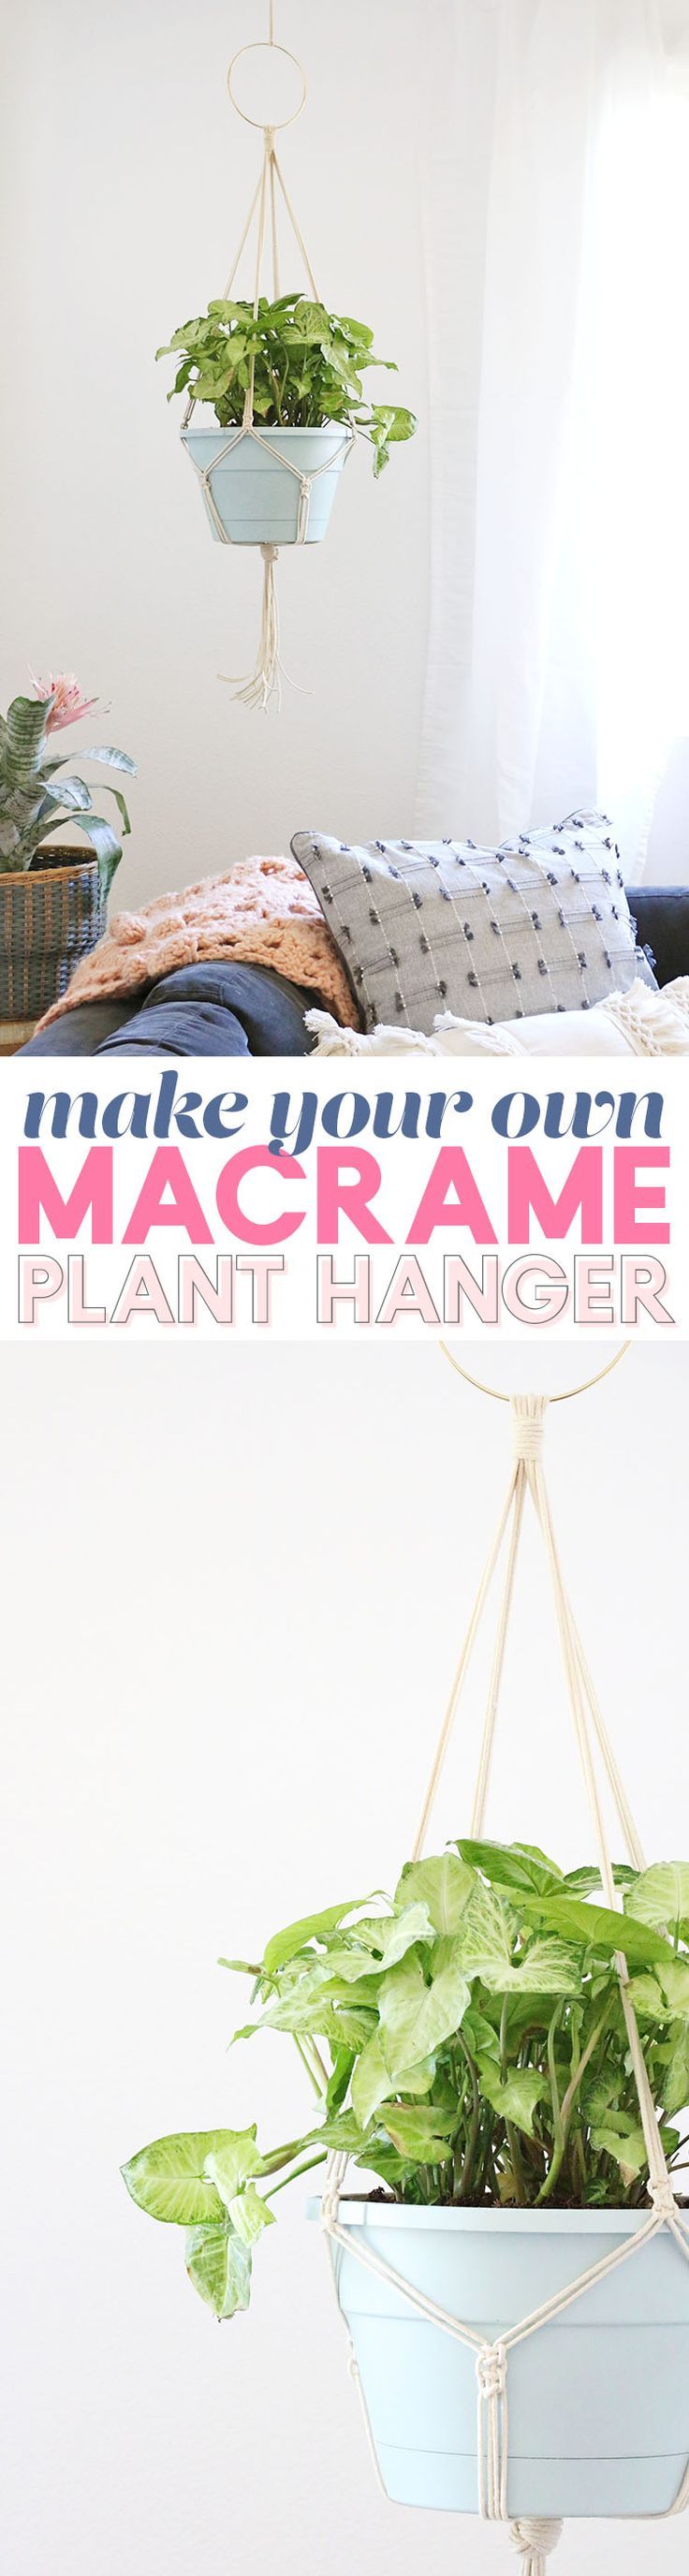 learn how to make your own simple diy macrame plant hanger - full photo instruct...